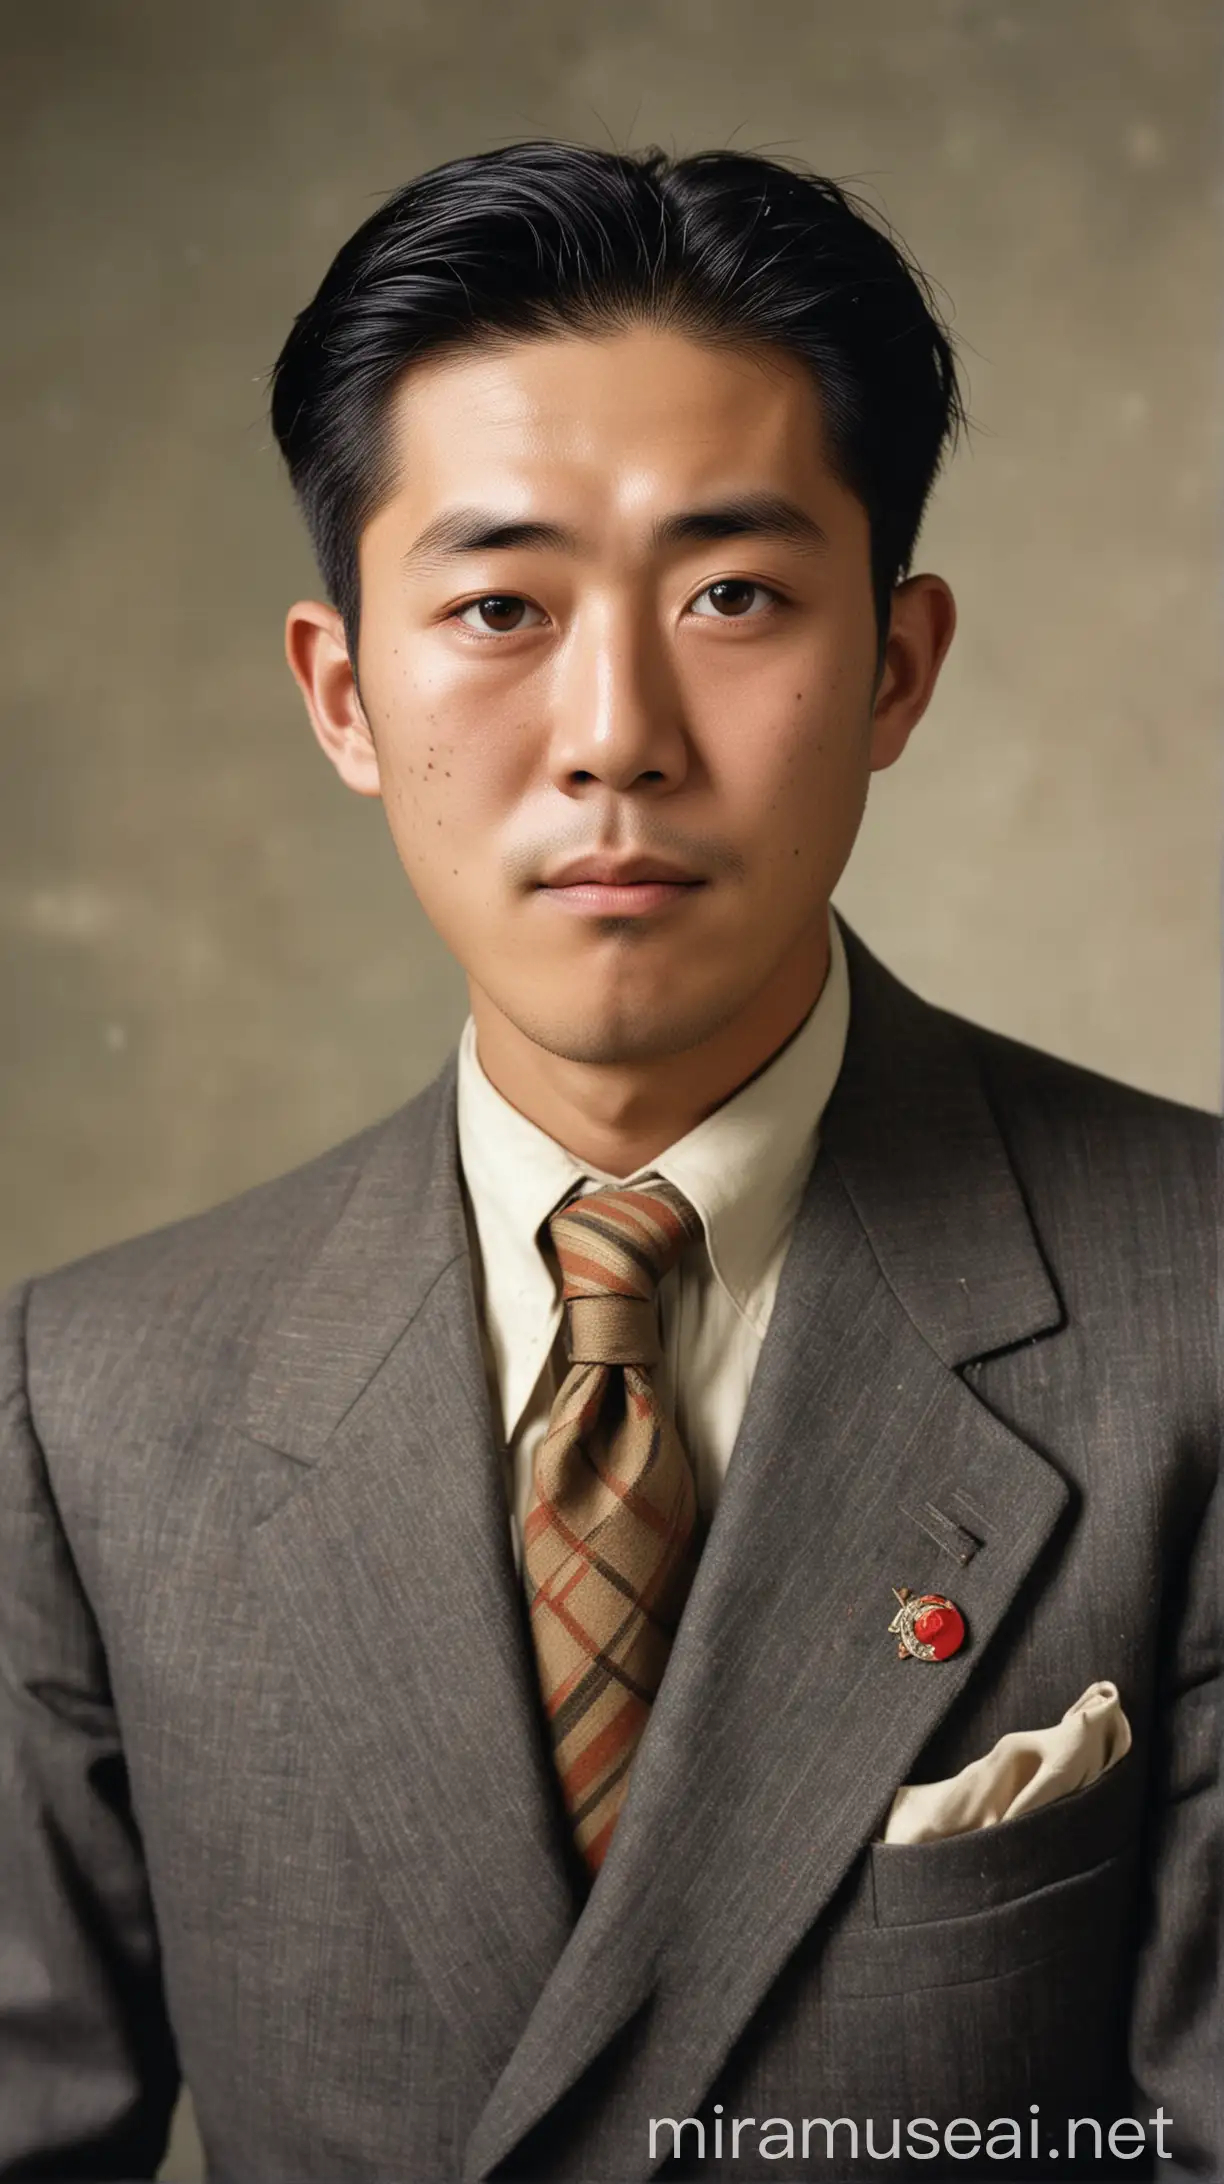 Full color image. A Japanese engineer Tsutomu Yamaguchi In the year 1945. He has serious expression on his face. He is in his 25. He is wearing tailored suit